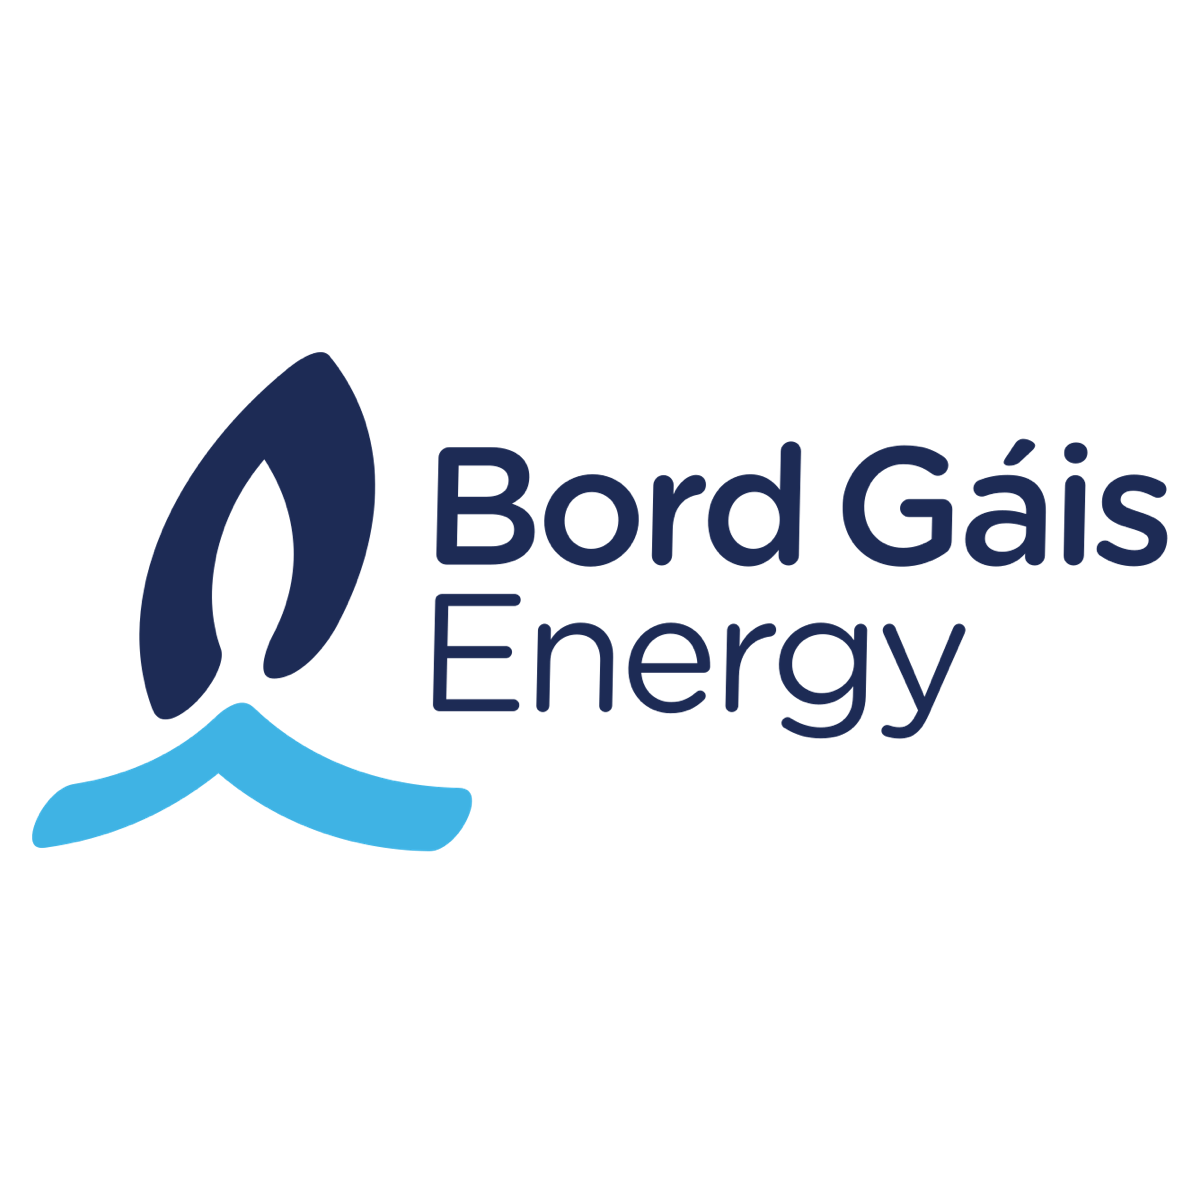 Sign into your online account | Bord Gáis Energy